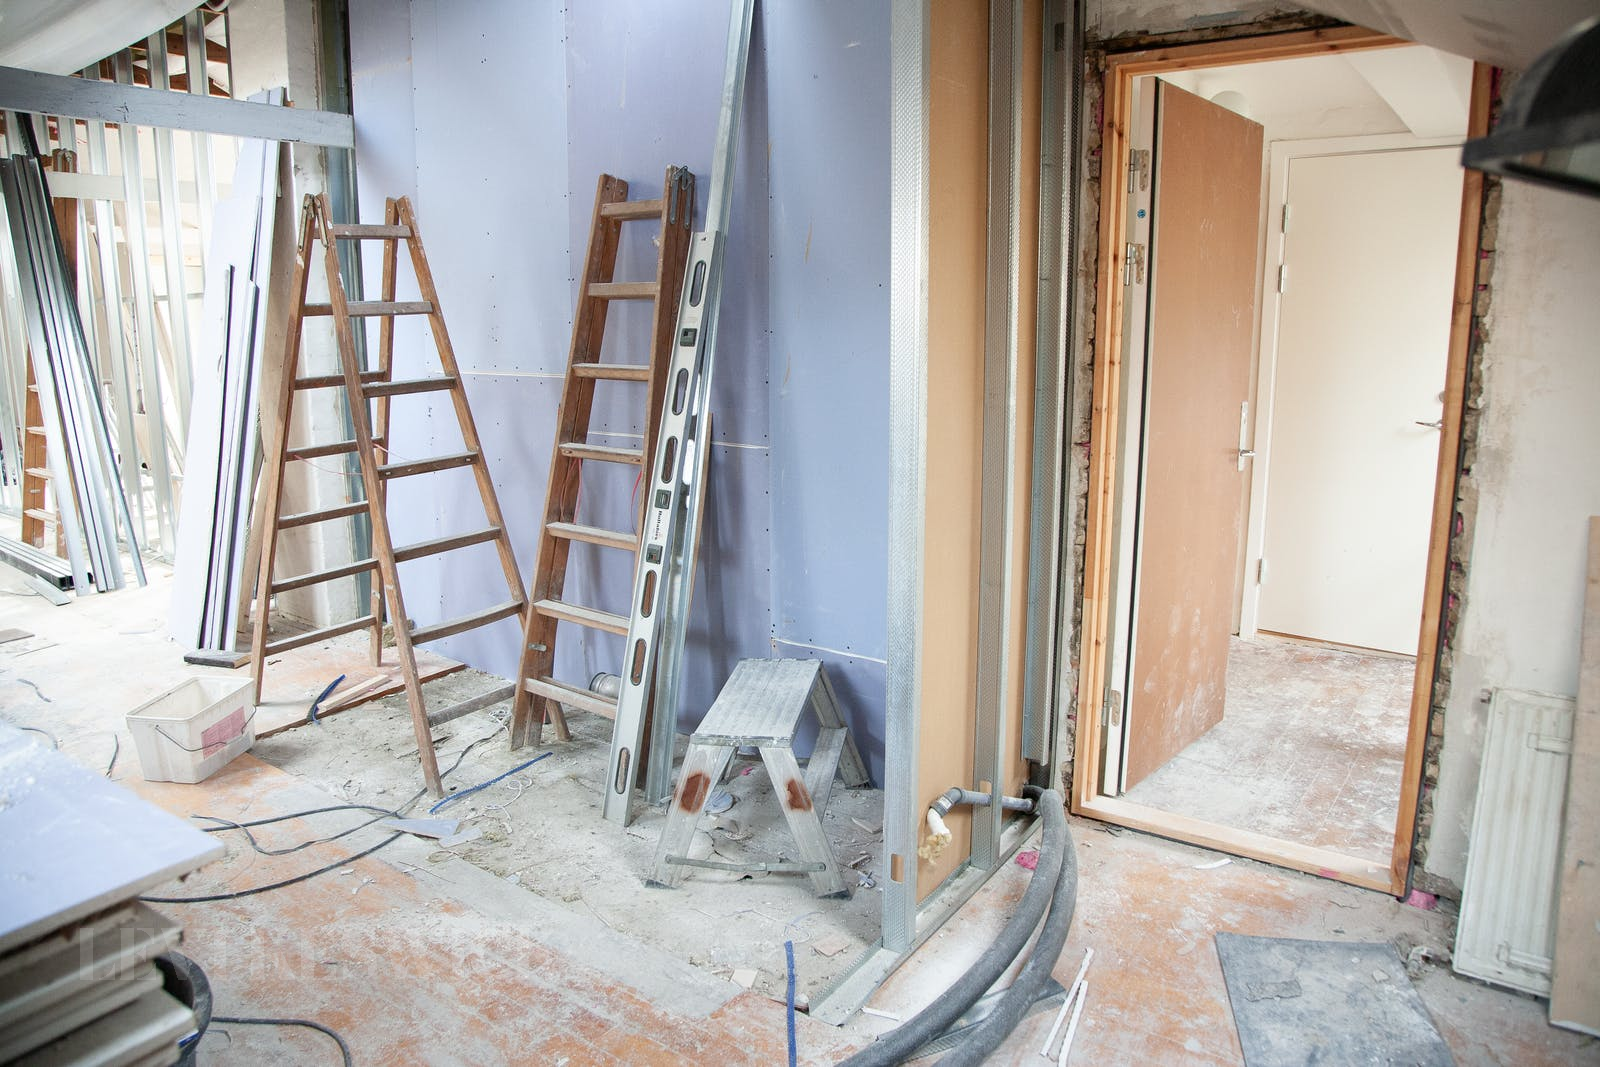 Make Your Home Renovation Project A Big Success With These 6 Tips